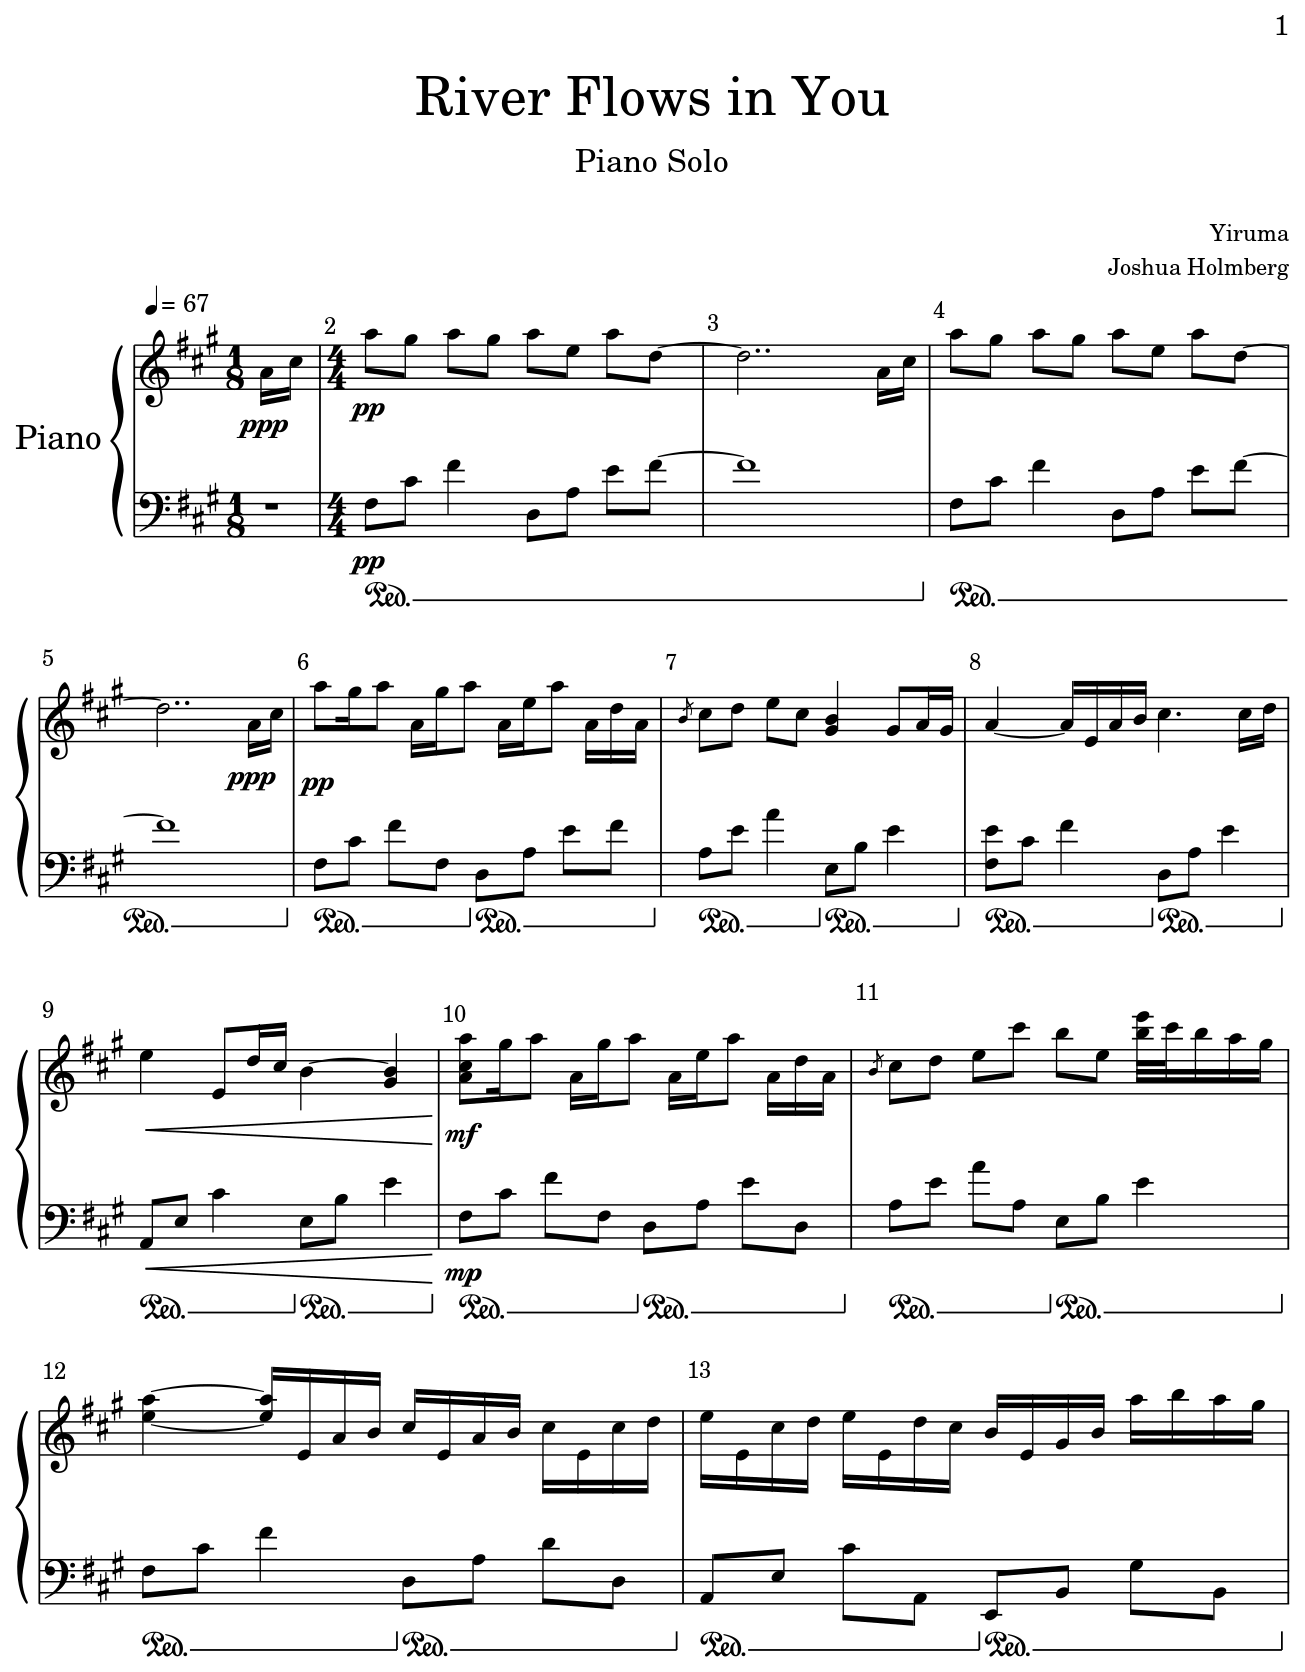 River Flows in You - Sheet music for Piano